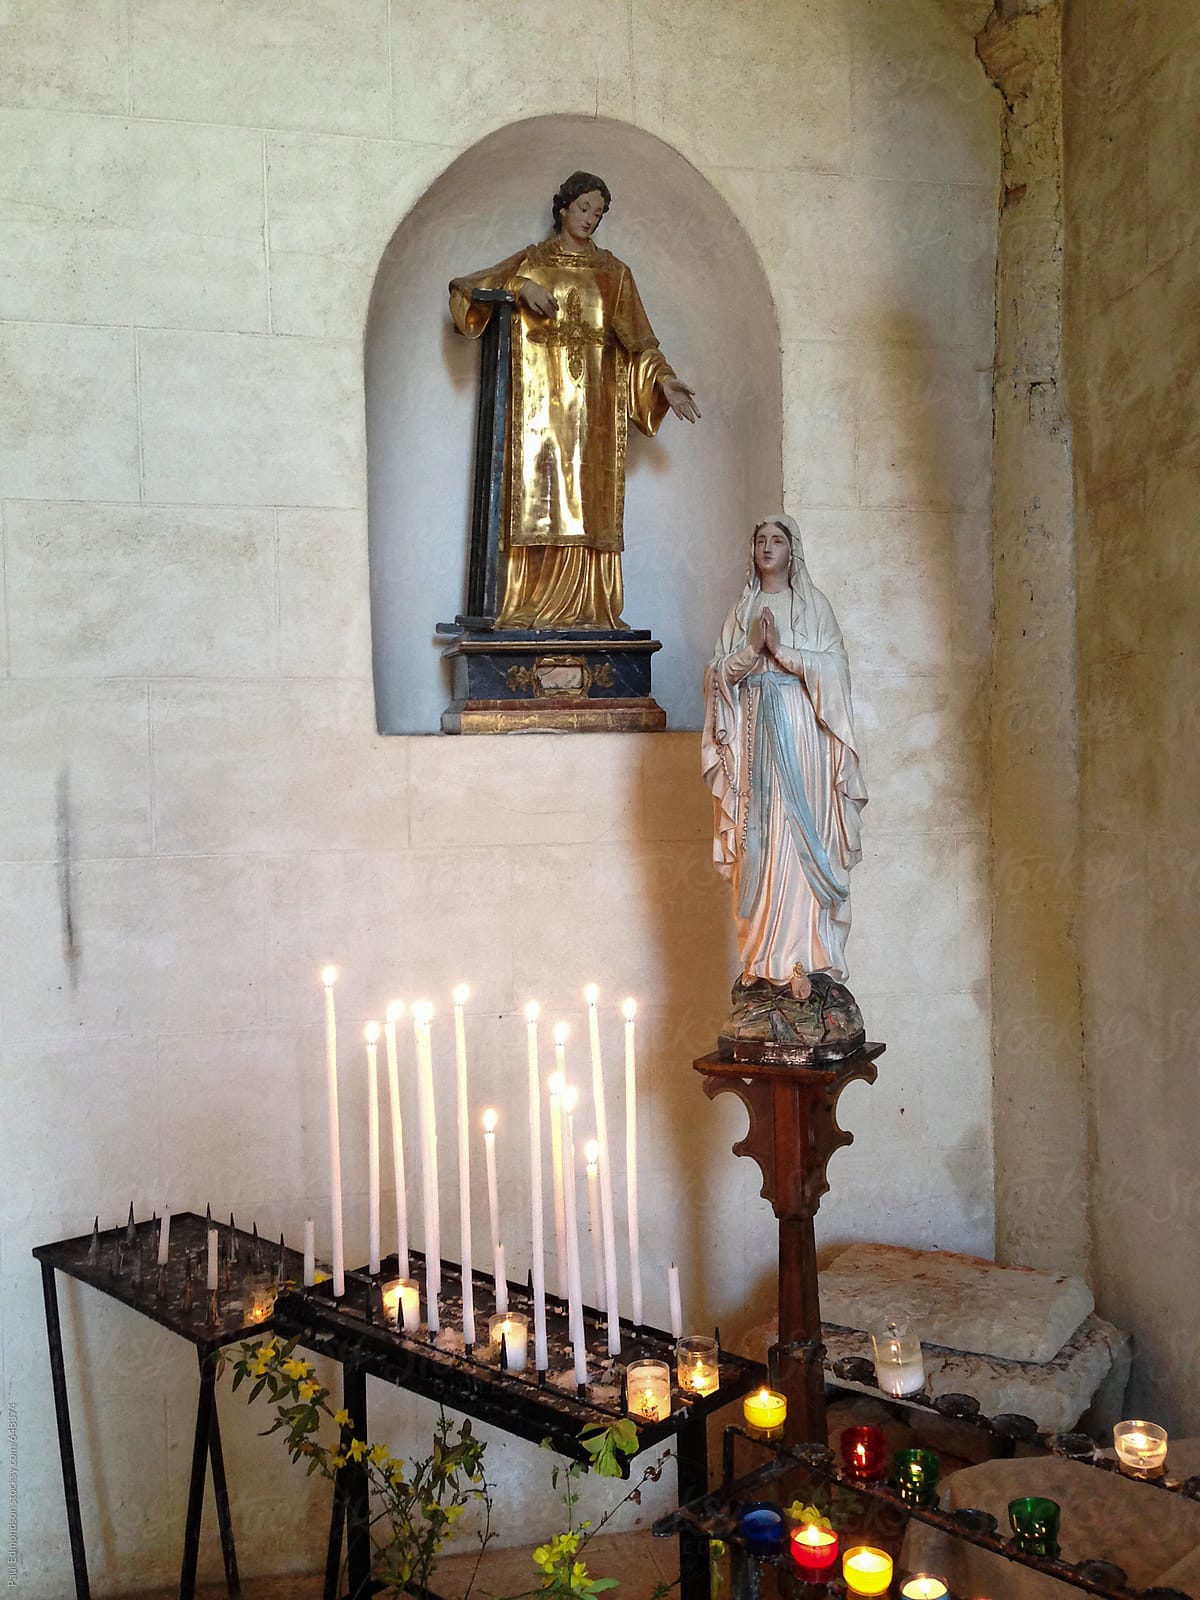 Interior of Catholic church, lit candles and religious icons, France